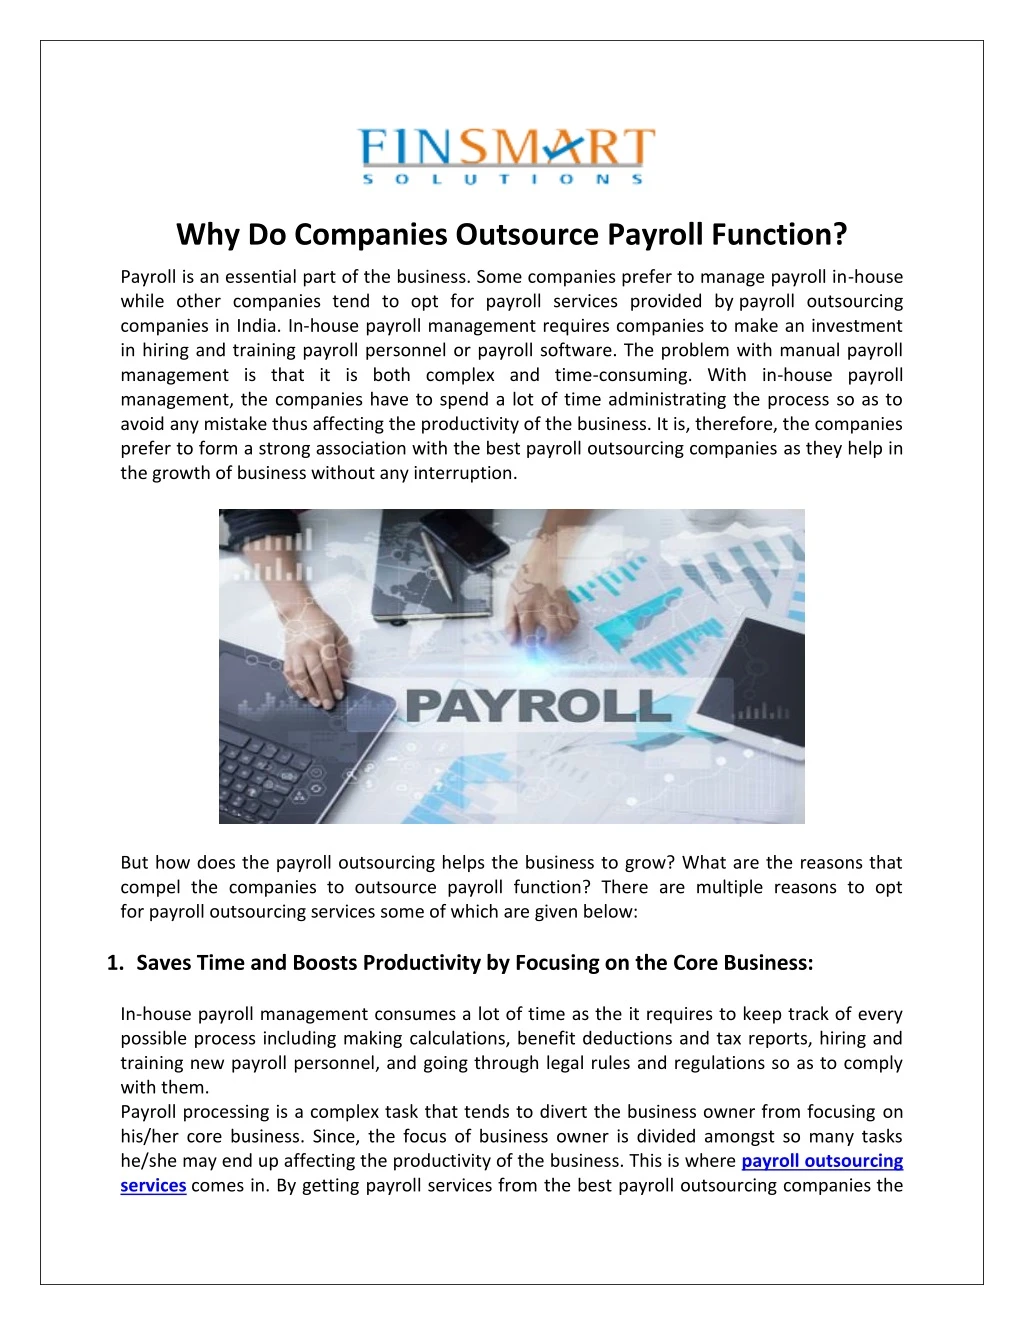 why do companies outsource payroll function